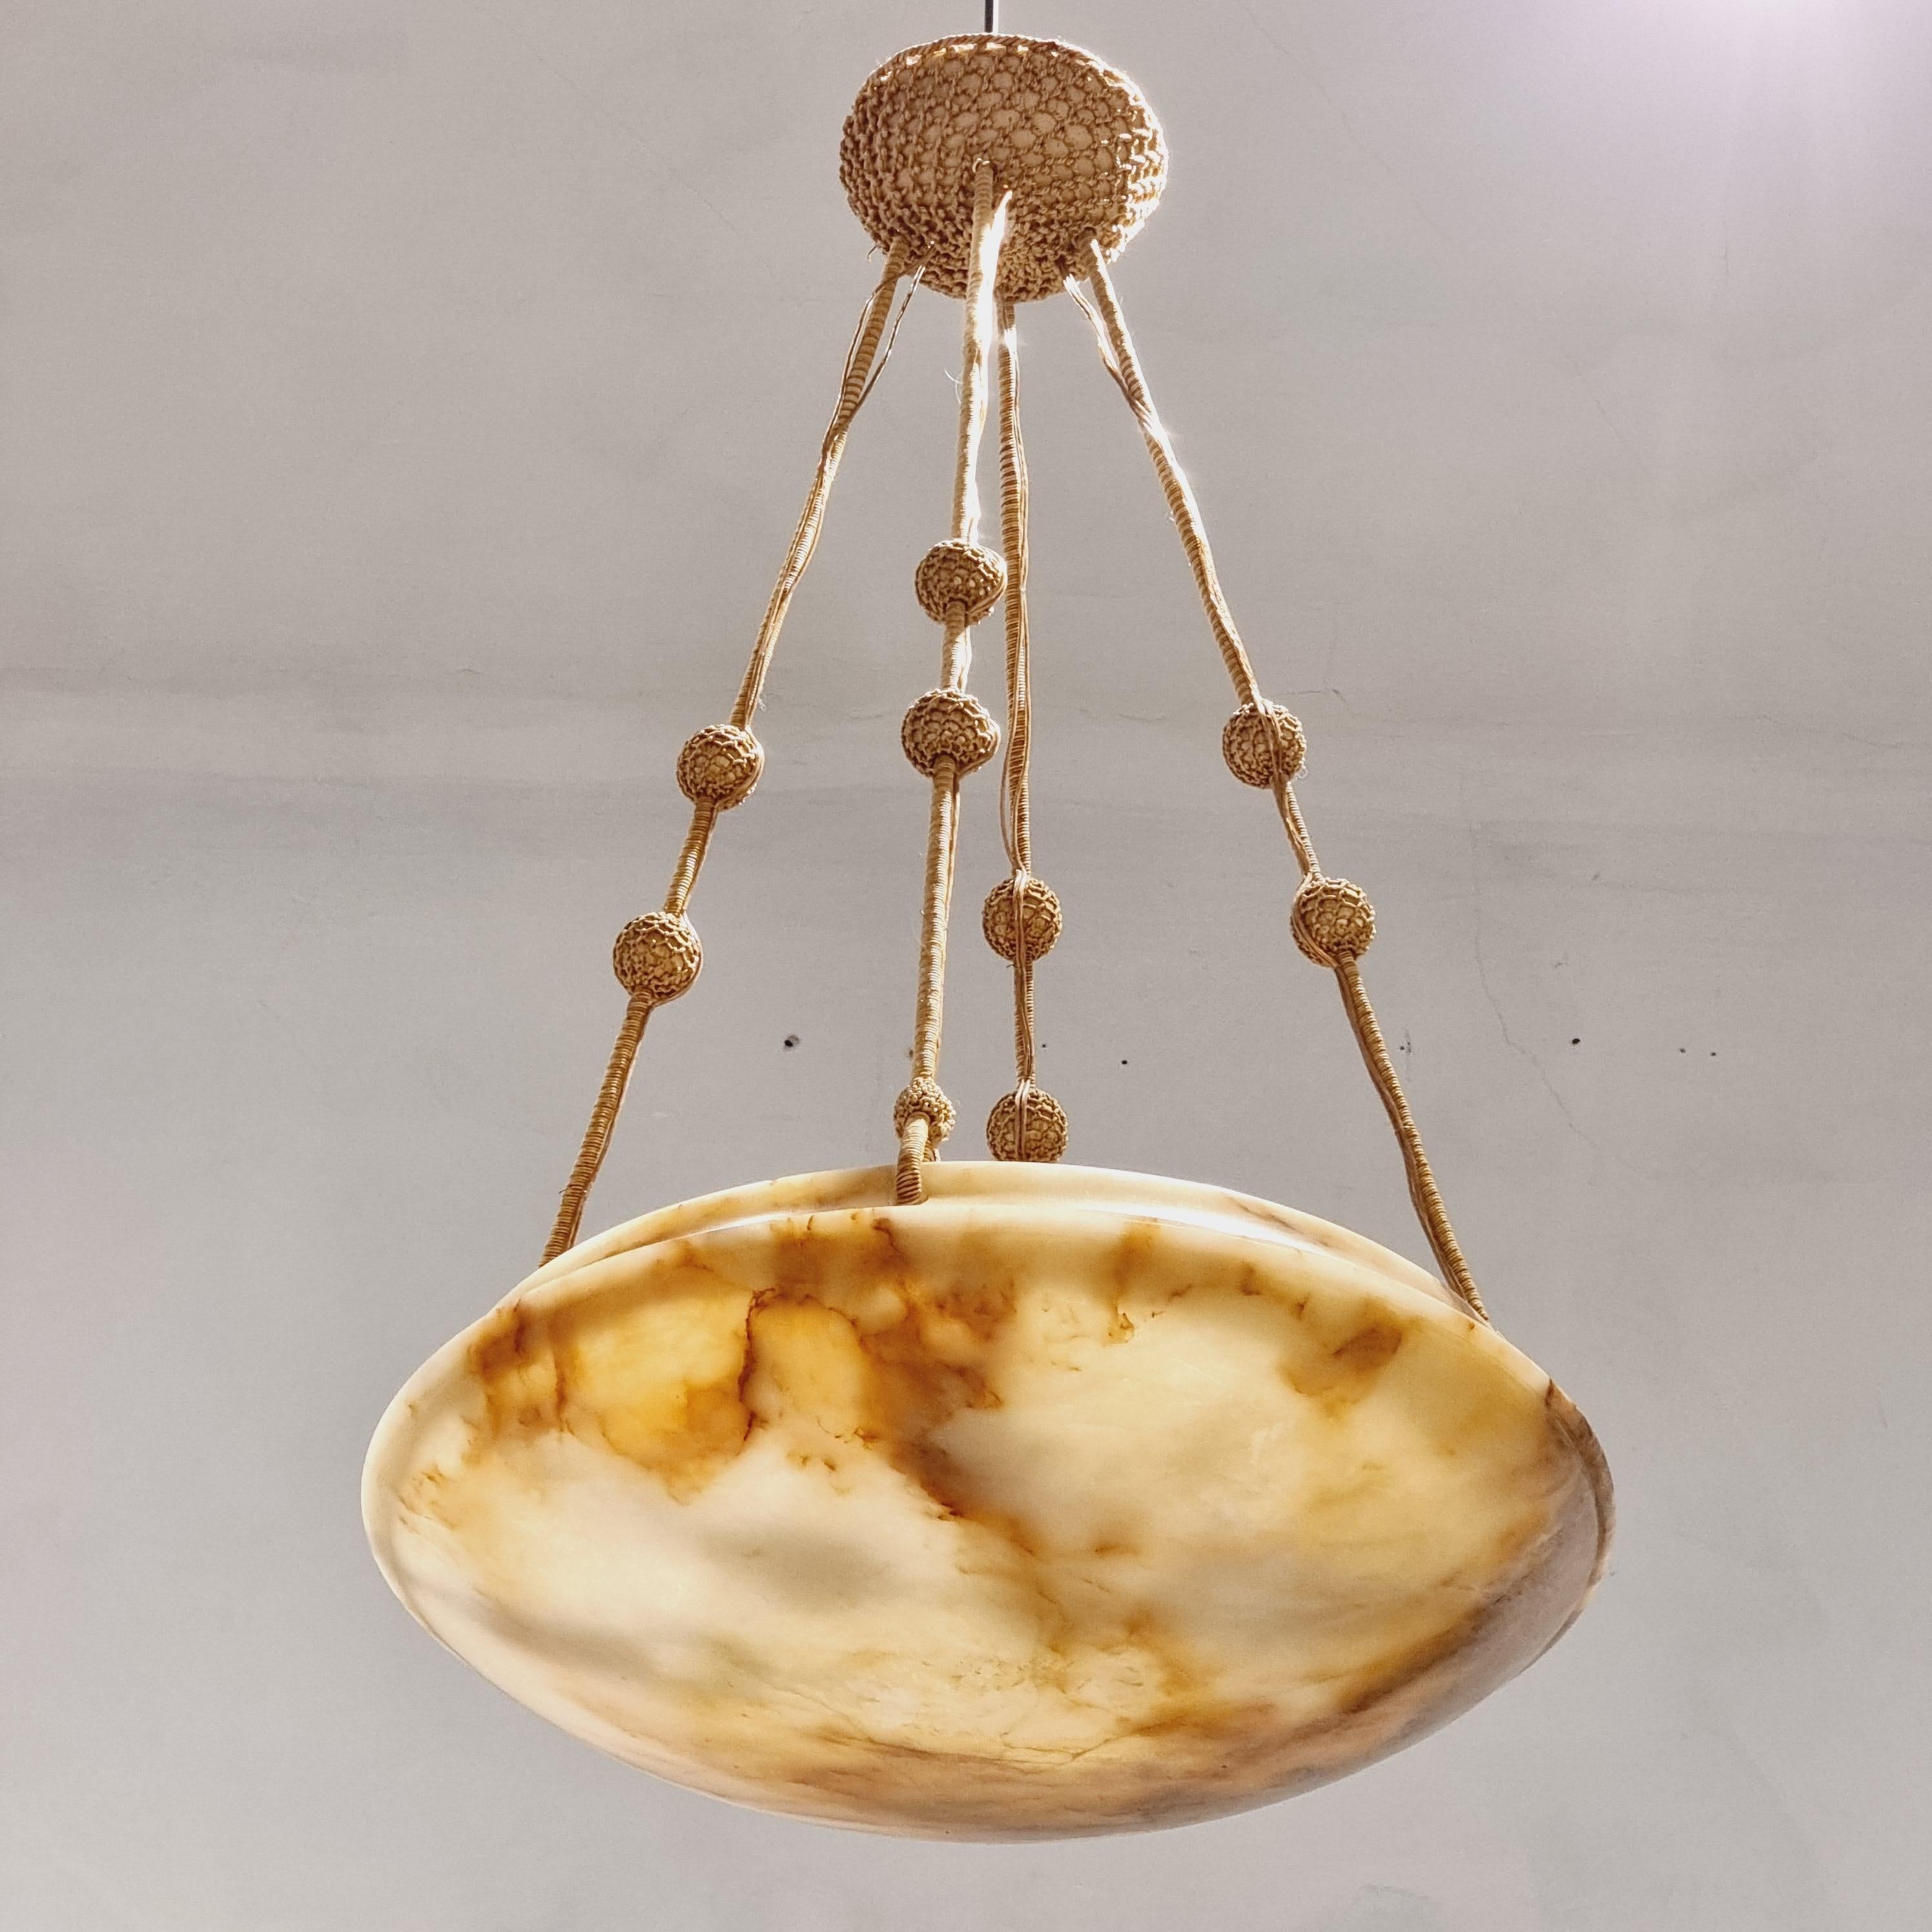 Large beautiful alabaster pendant, Swedish Art Deco. Decorative as well as a soft light source which works in most rooms, perfect for bedrooms and living rooms to give a cozy feel.

With original cords - rewired ( swedish standard). In good